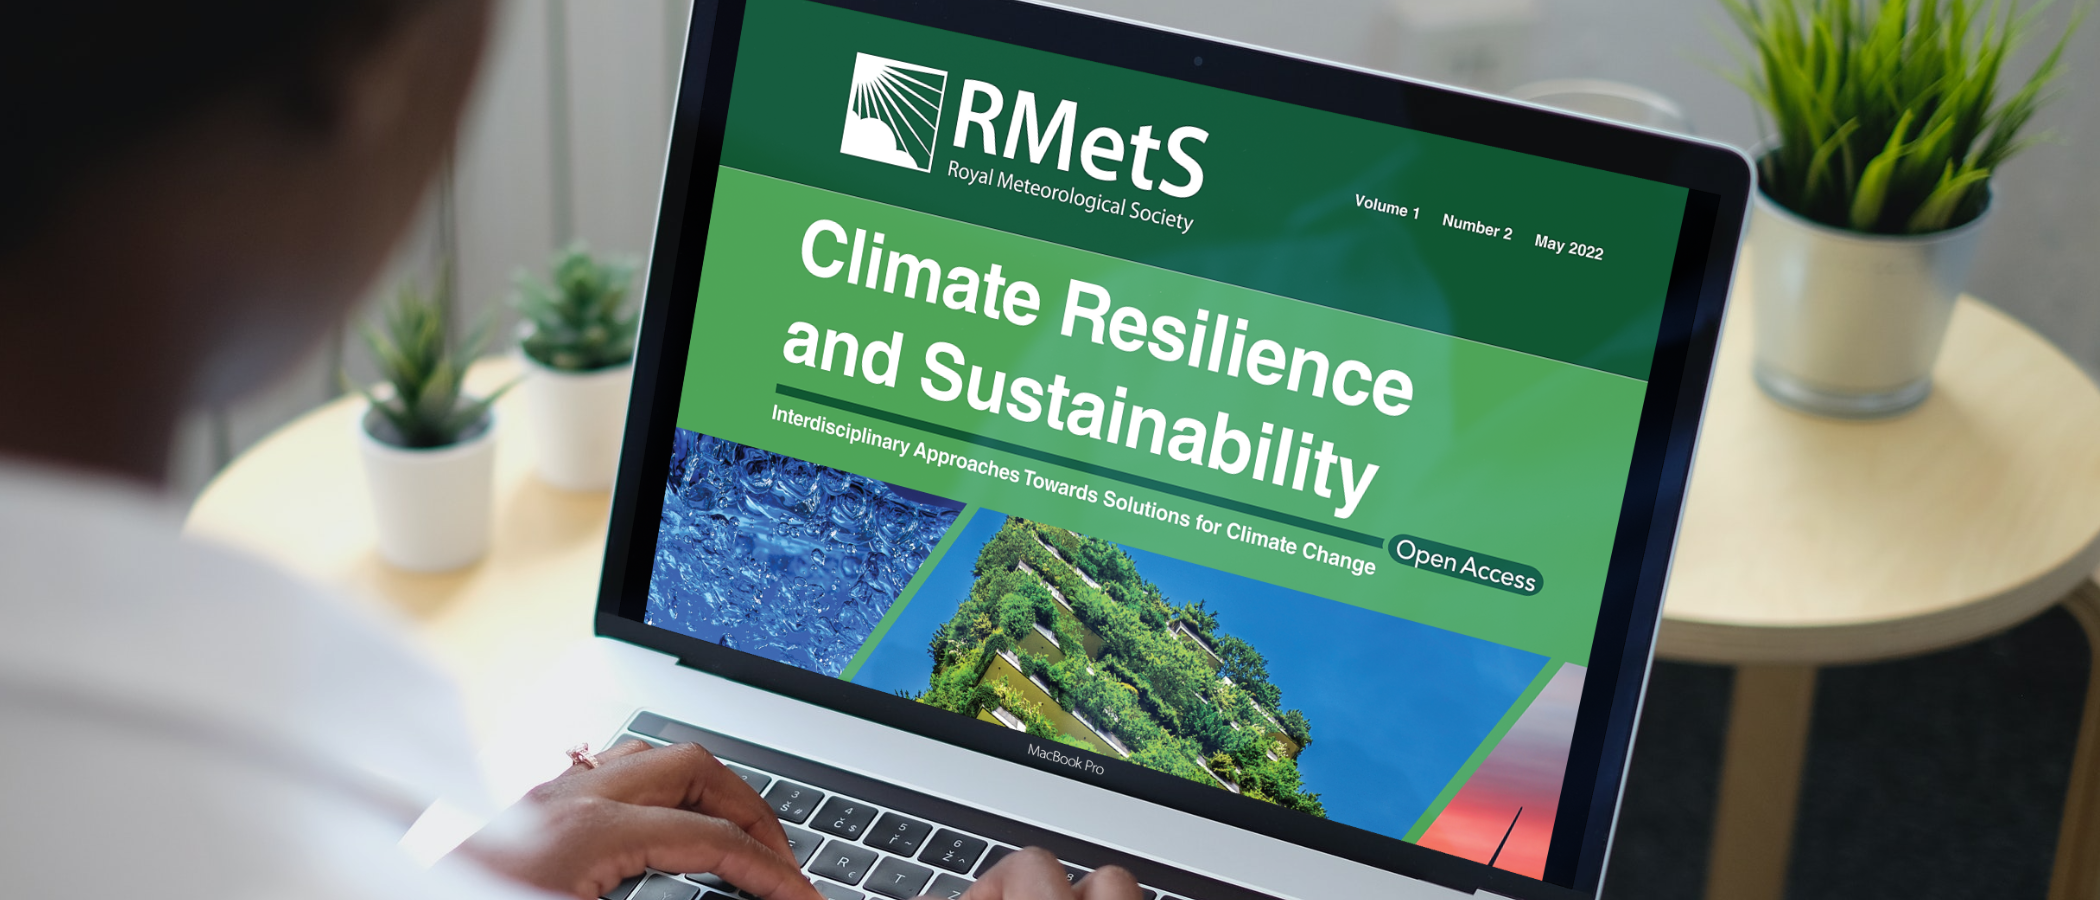 Journal cover on computer screen for Climate Resilience and Sustainability